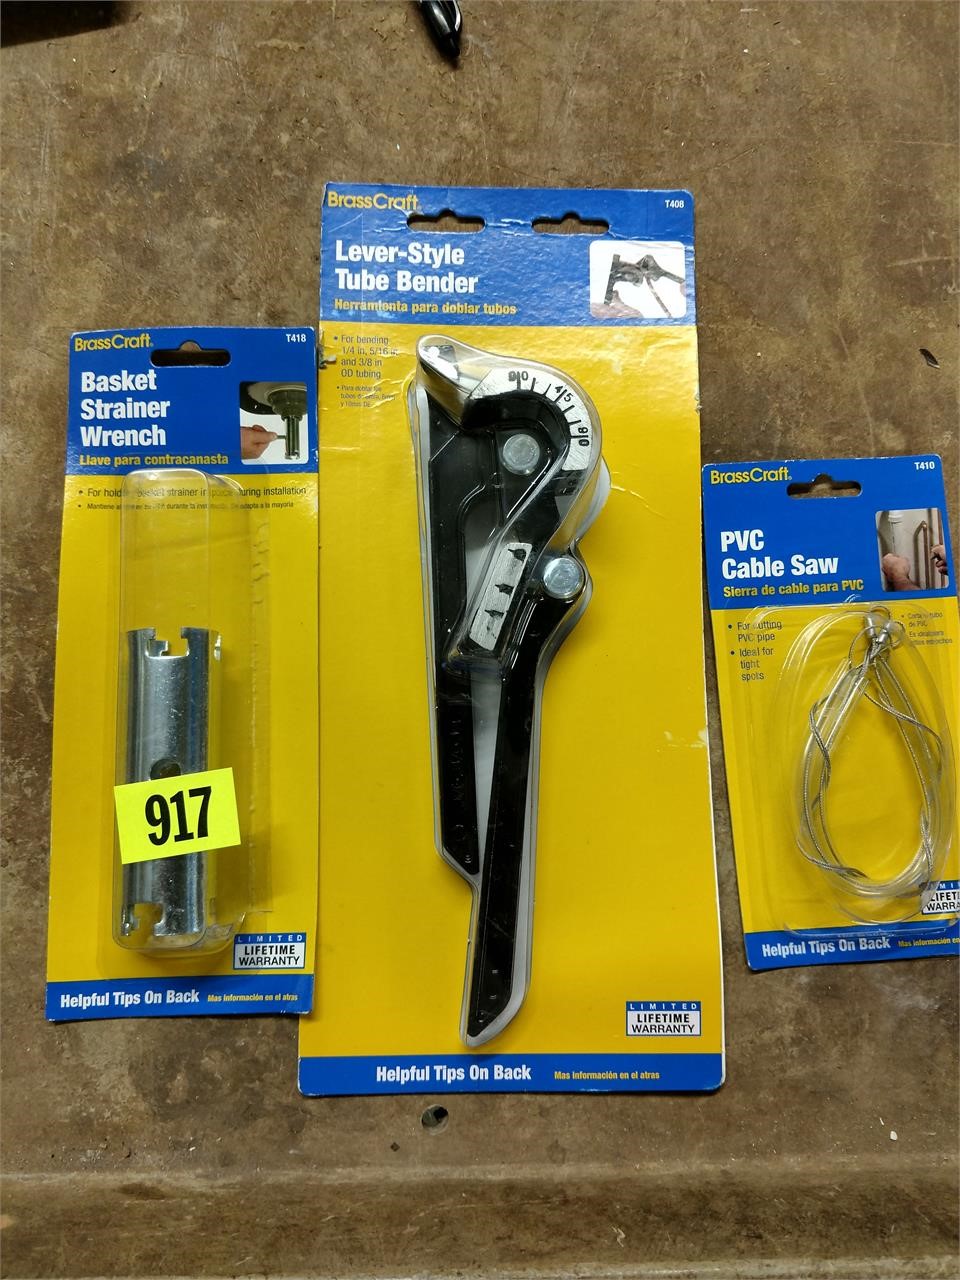 Returns, discontinued and new lowes, home depot items